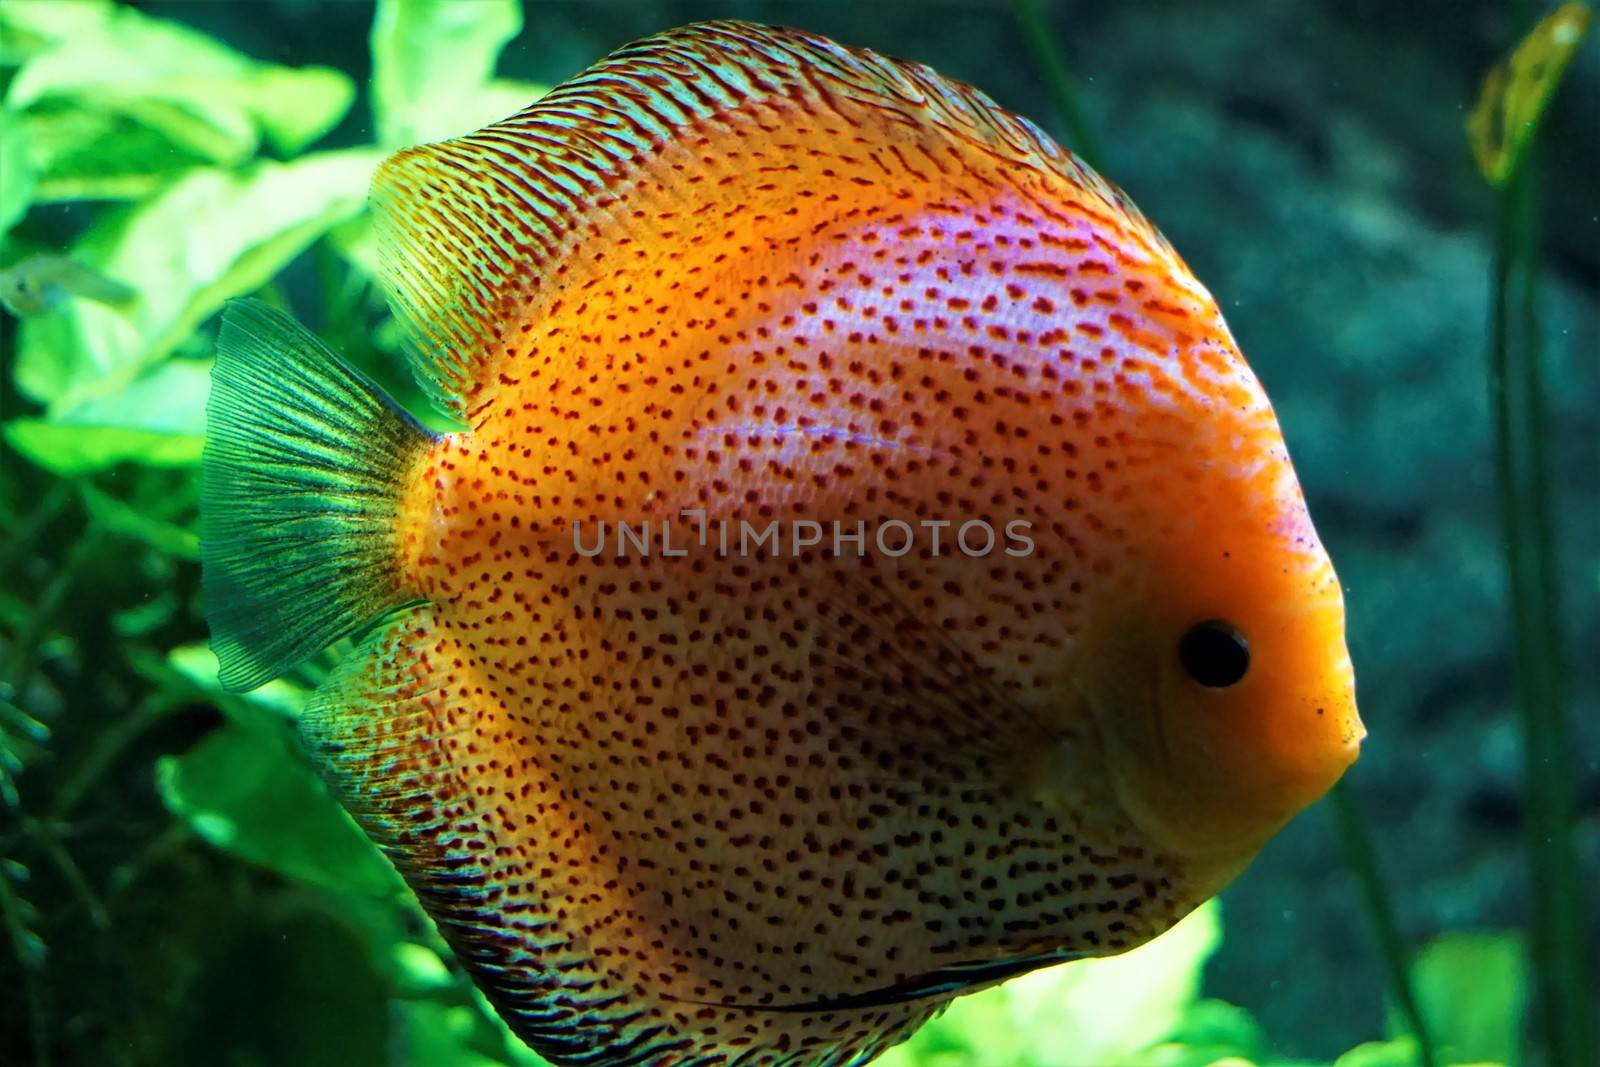 Discus fish swimming in the Karlsurhe zoo, Germany